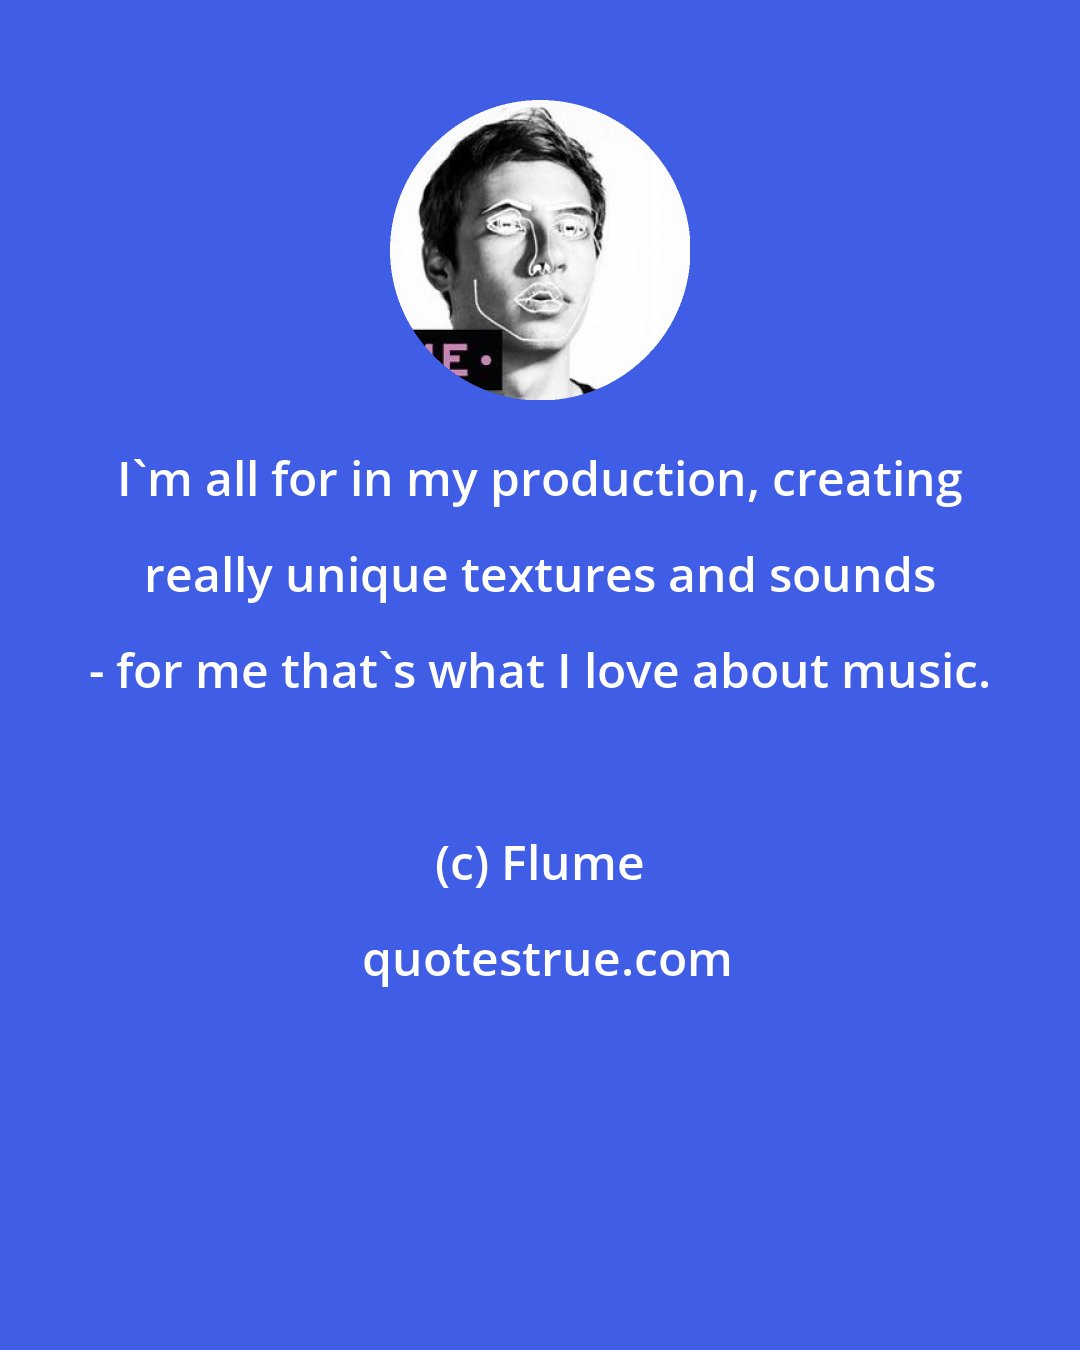 Flume: I'm all for in my production, creating really unique textures and sounds - for me that's what I love about music.